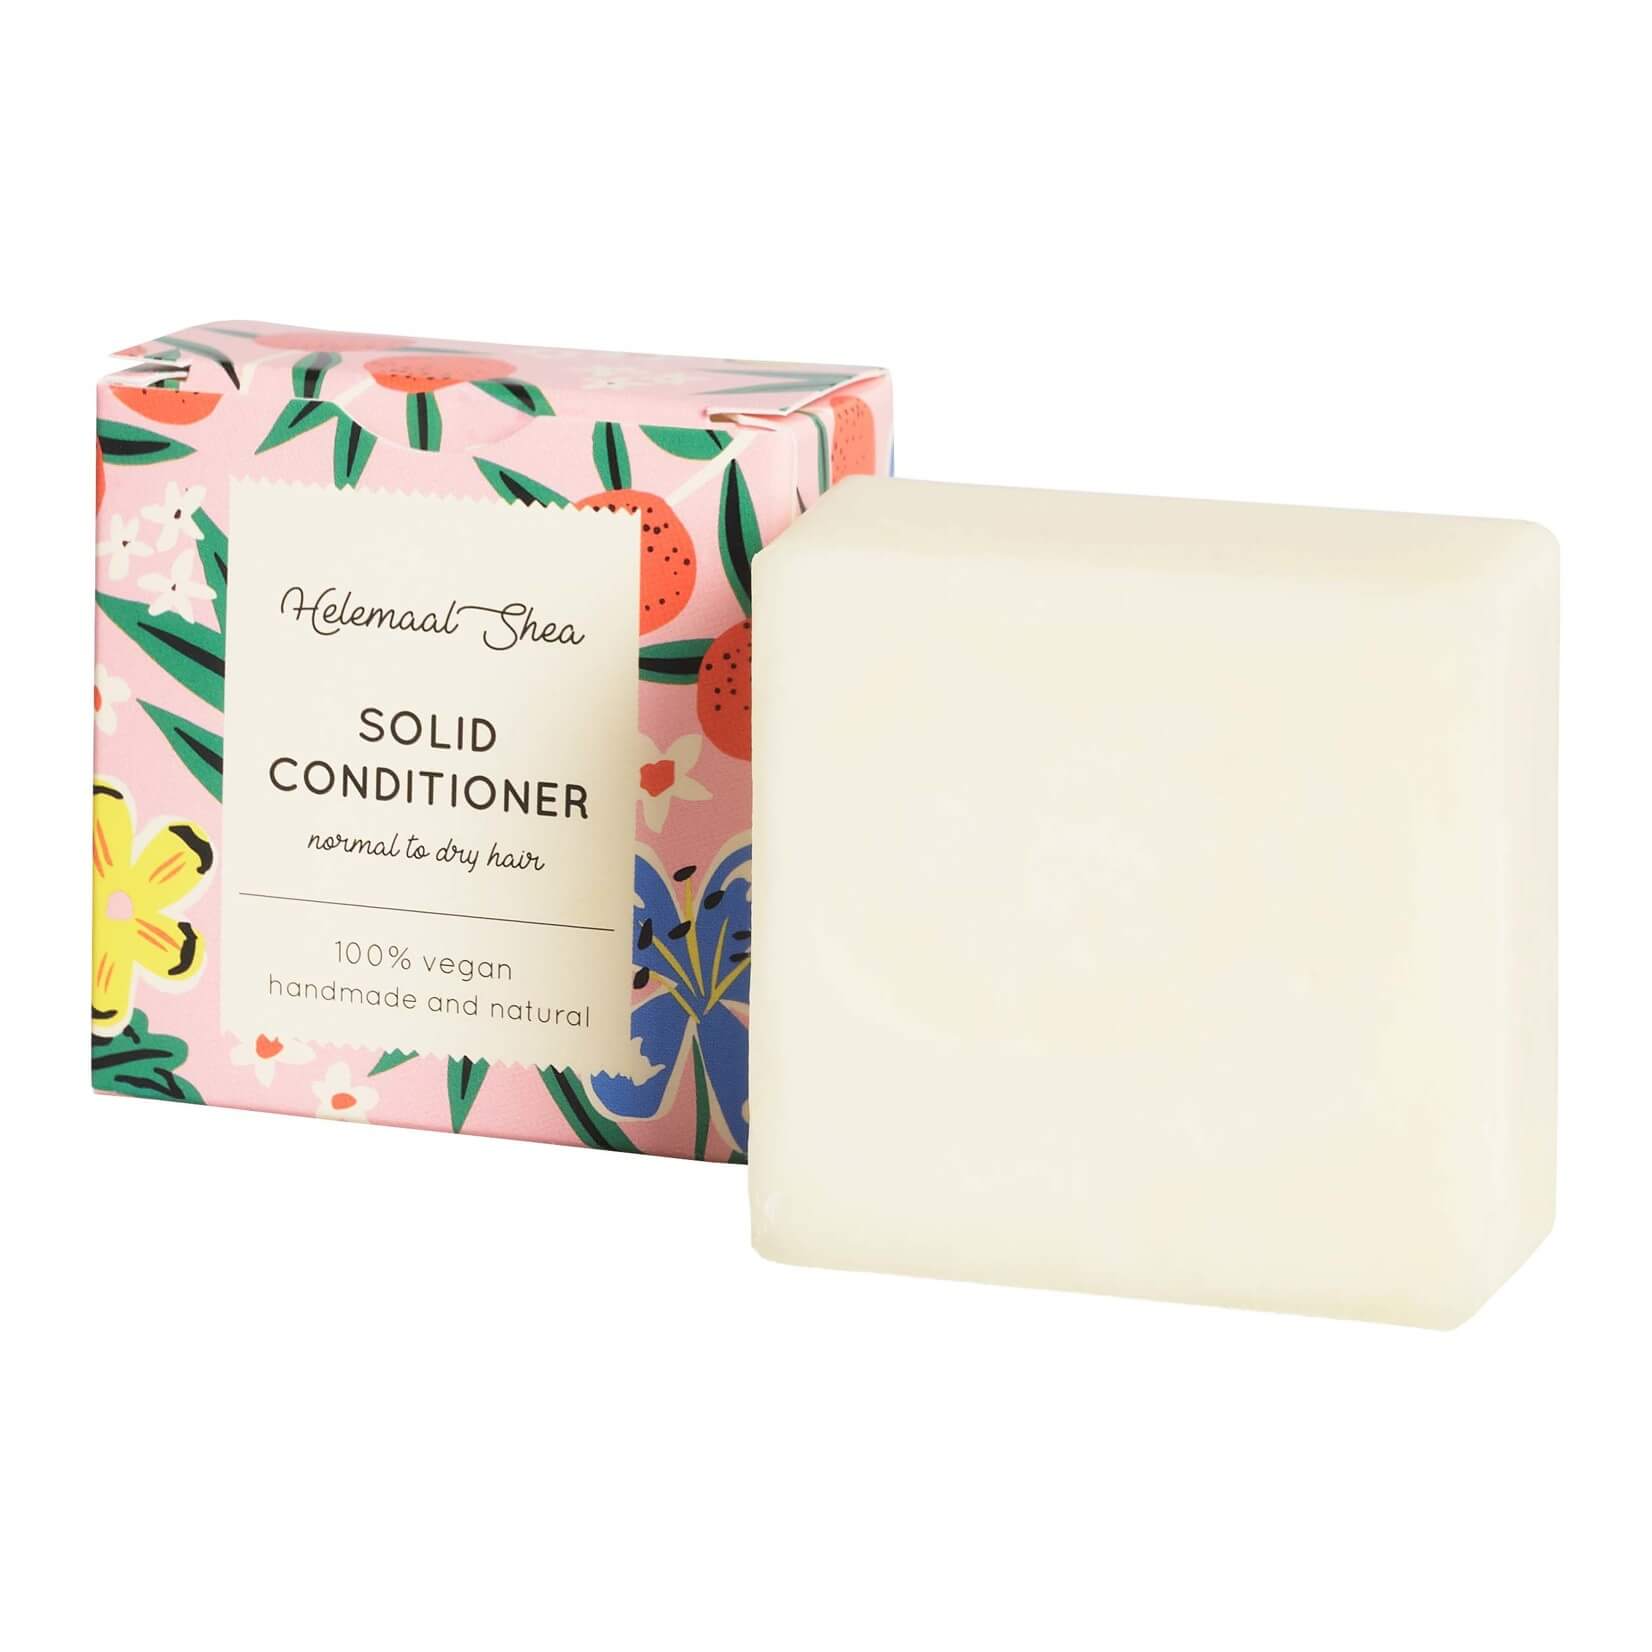 Solid Conditioner - Normal to Dry Hair - Plastic Free Amsterdam